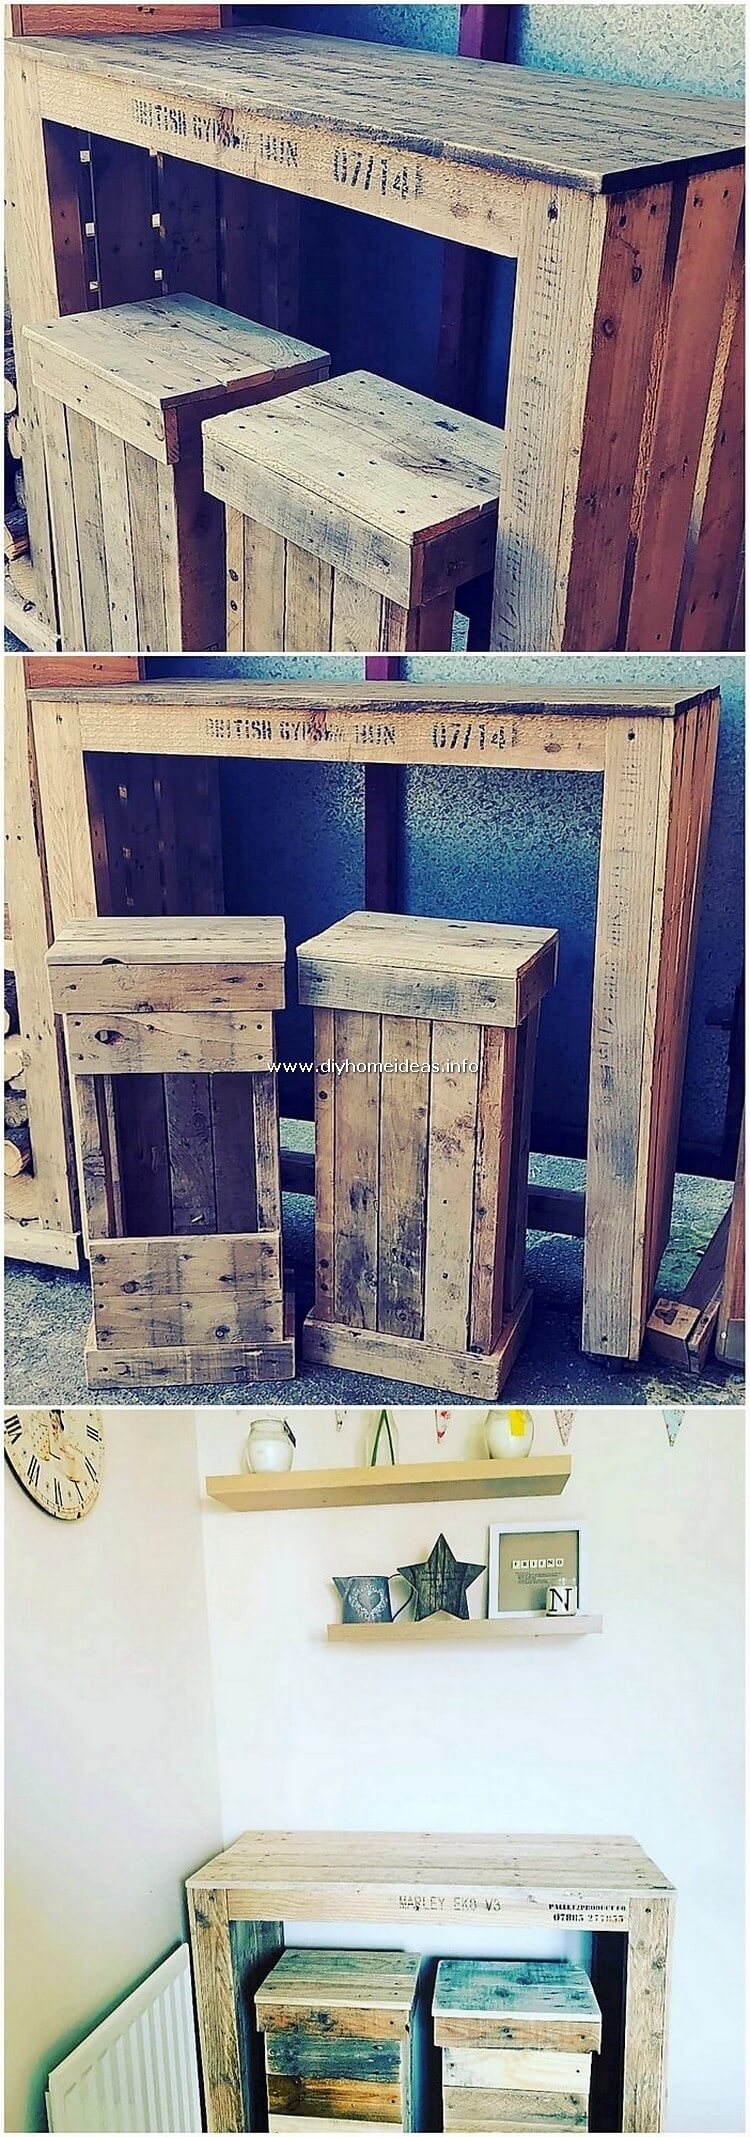 Pallet Desk Table and Stools